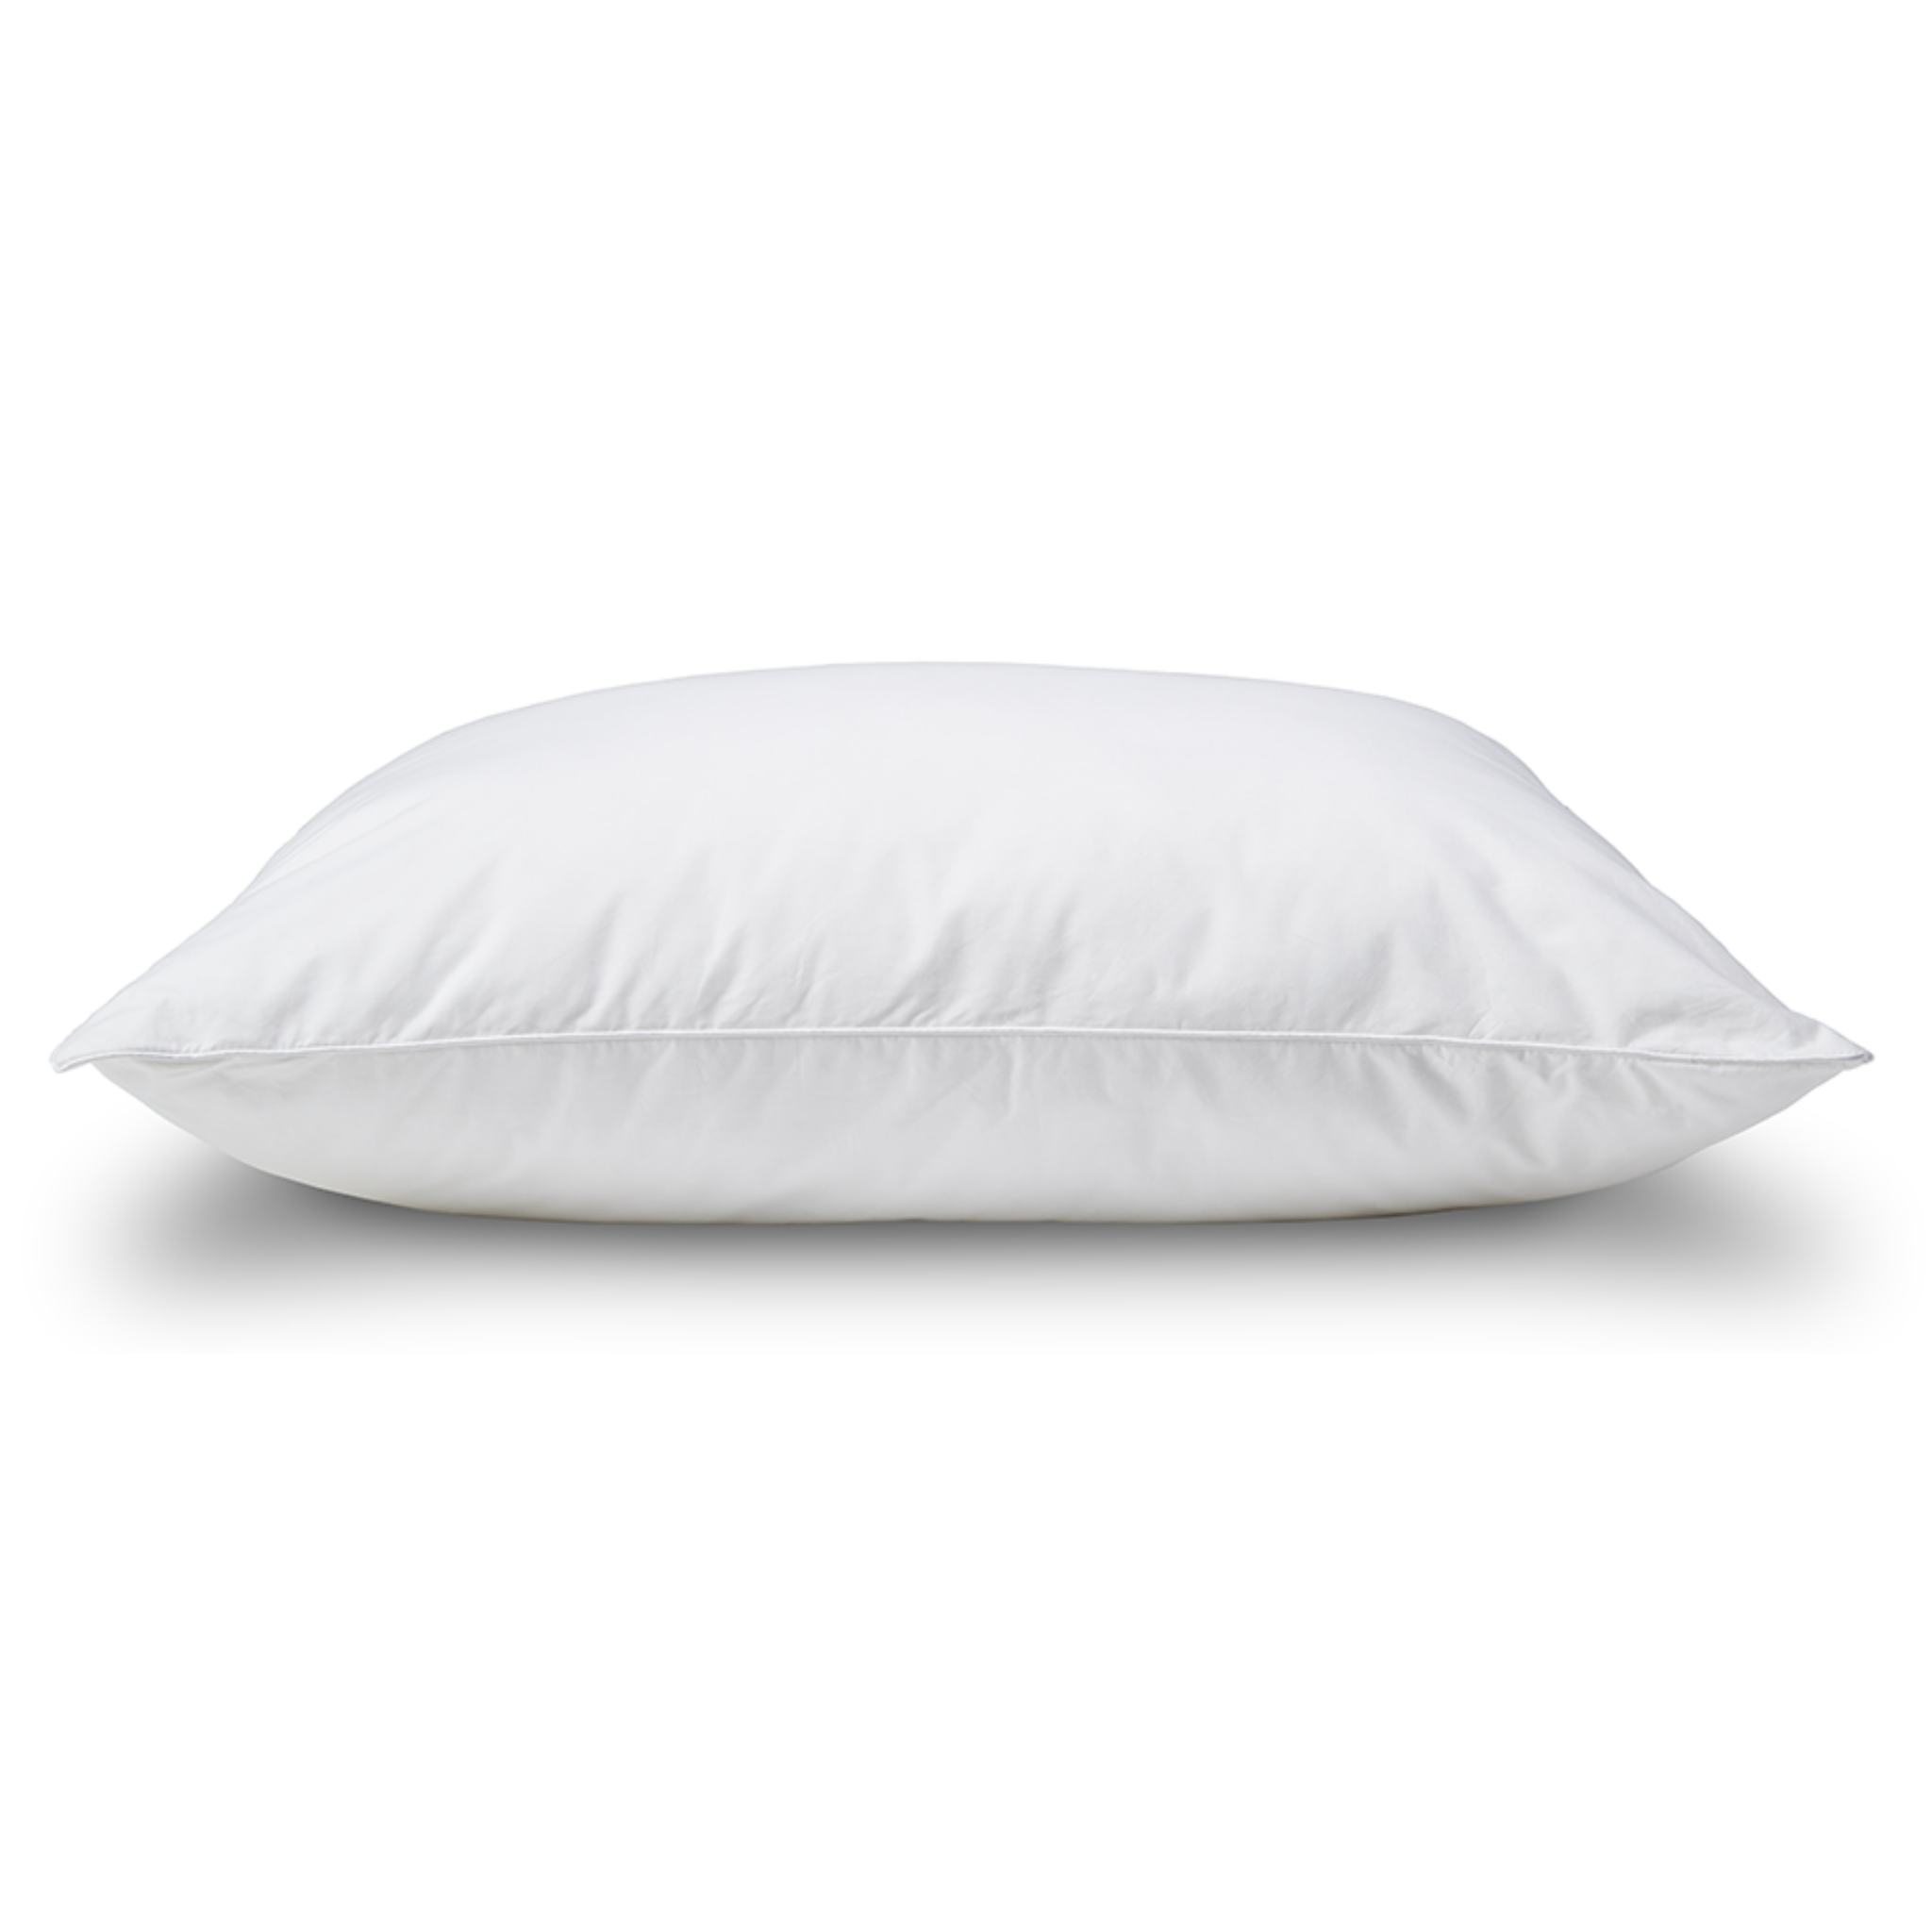 Firm Support Pillow with Bluetooth